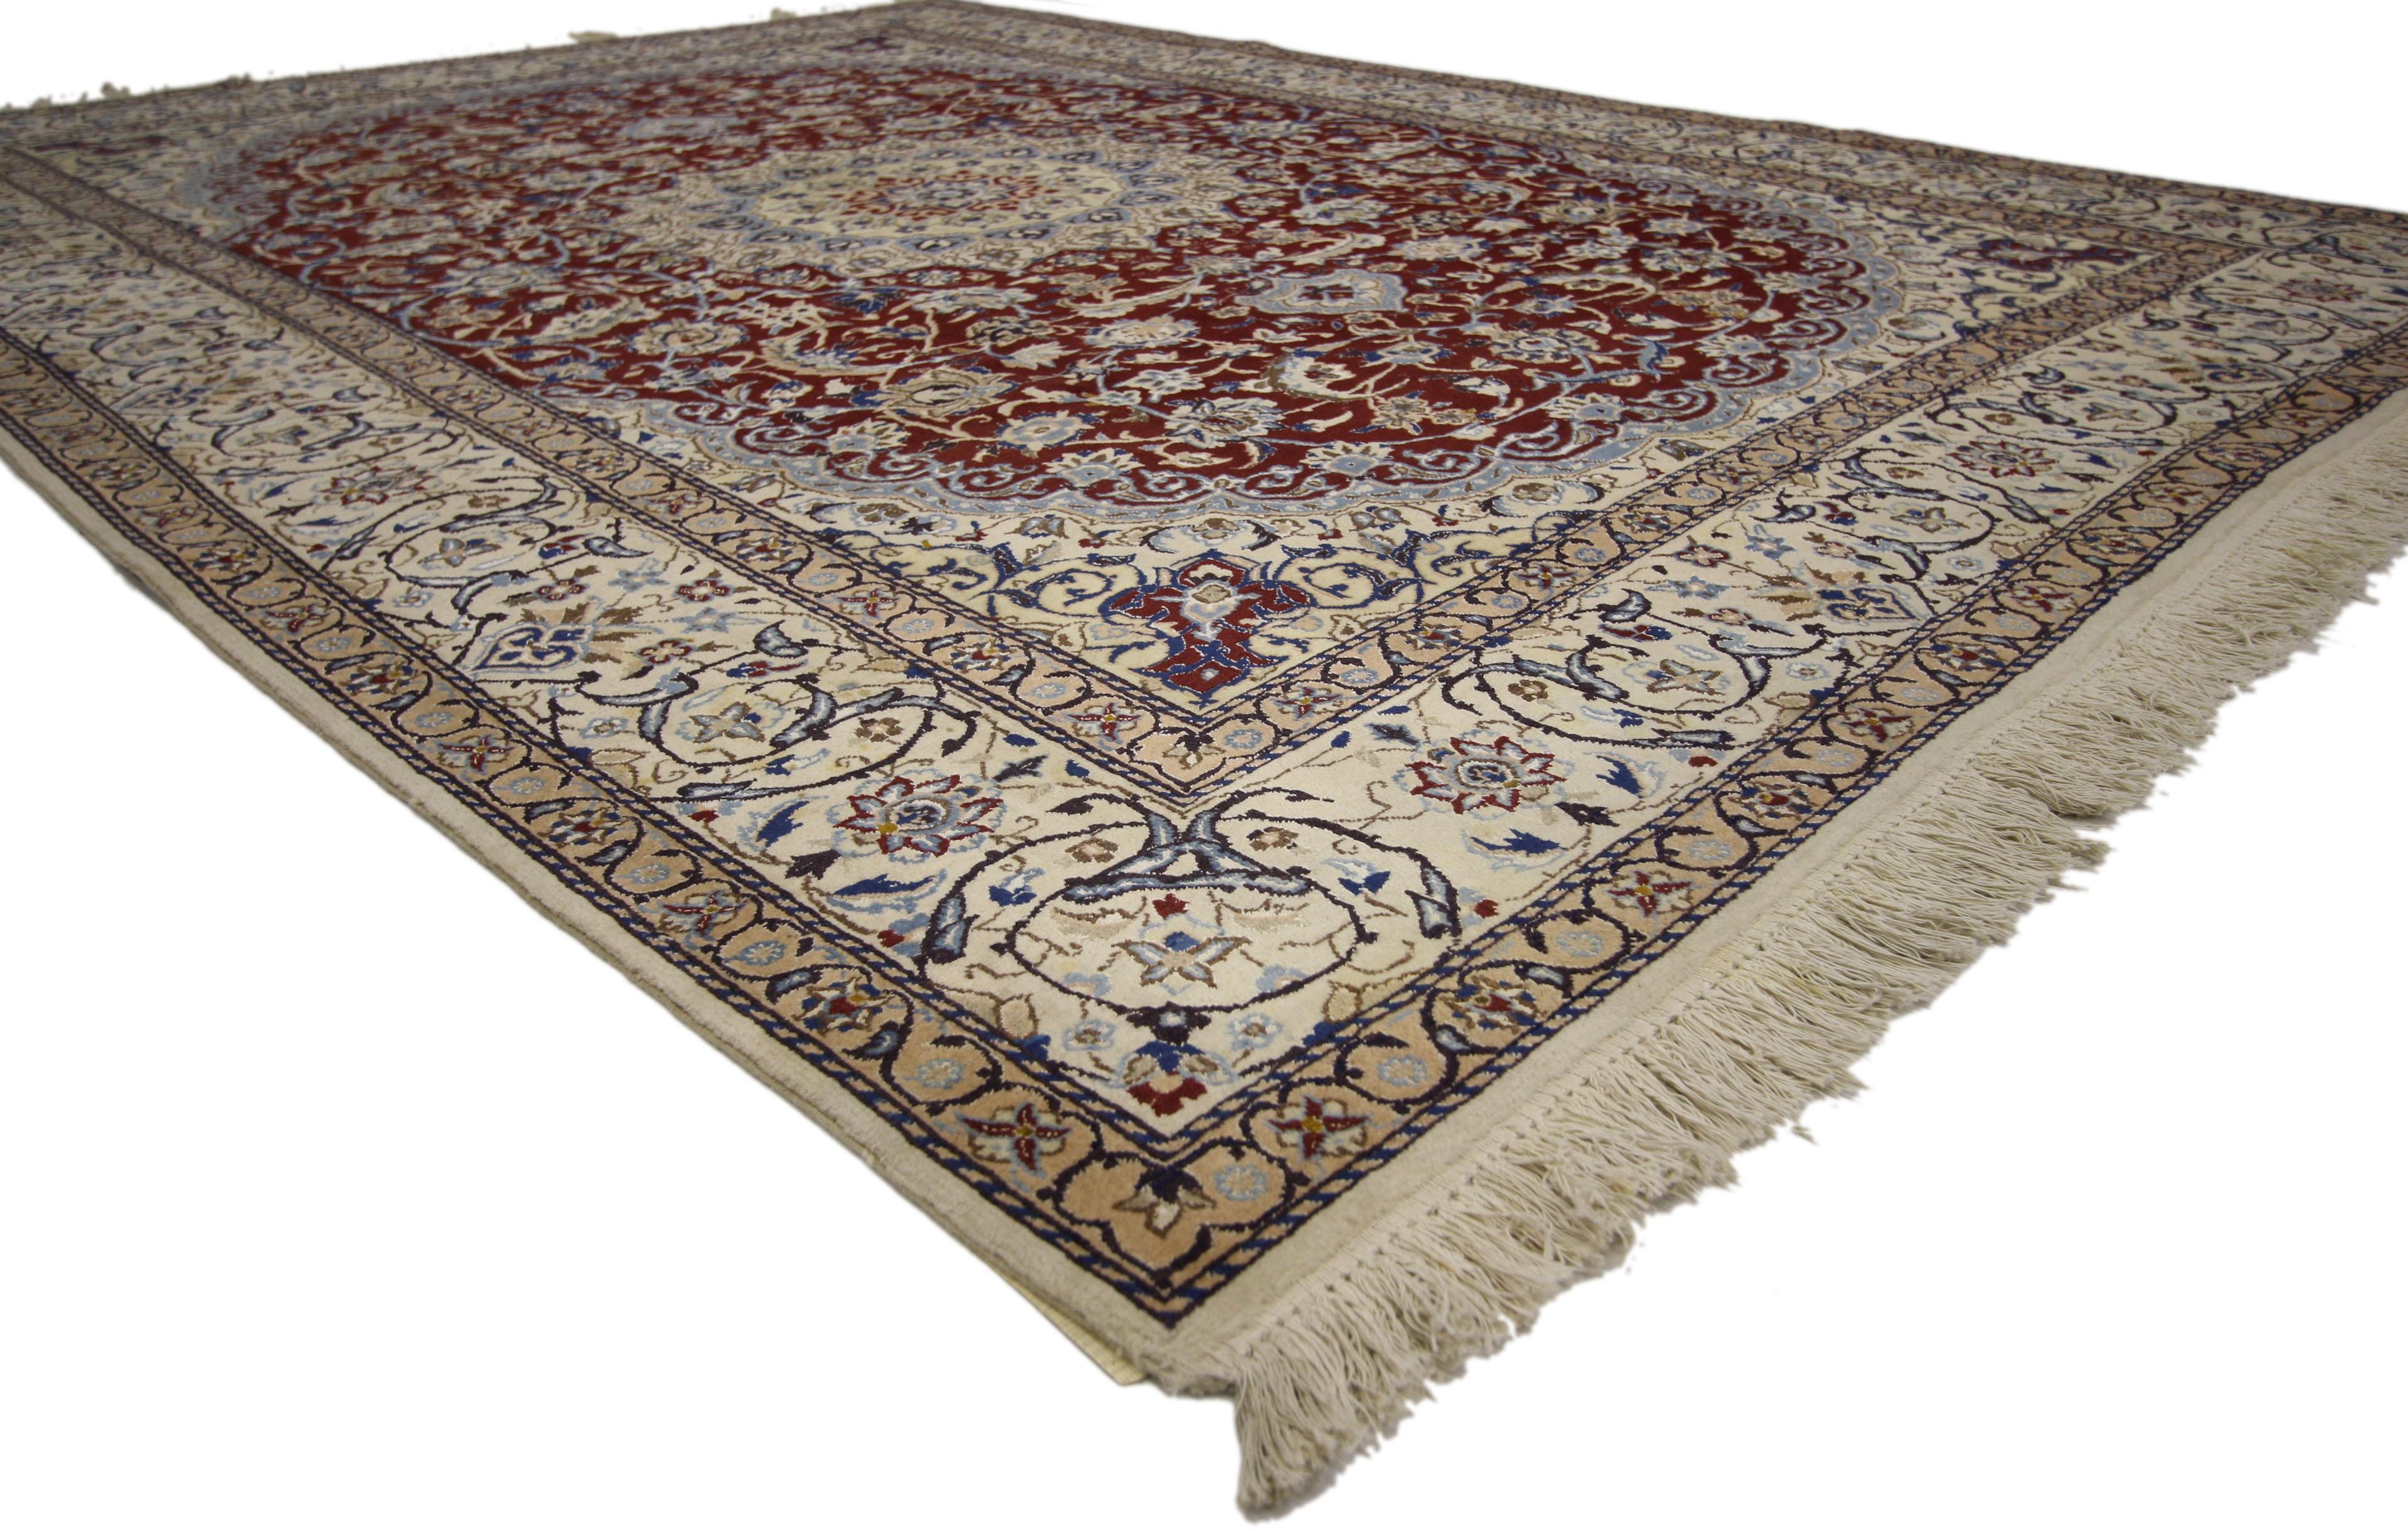 74241 Vintage Persian Nain Rug, 06'08 x 09'04. 
Emanating a timeless floral design with incredible detail and texture, this wool and silk vintage Persian Nain rug is a captivating vision of woven beauty. The ornate details and sophisticated colors